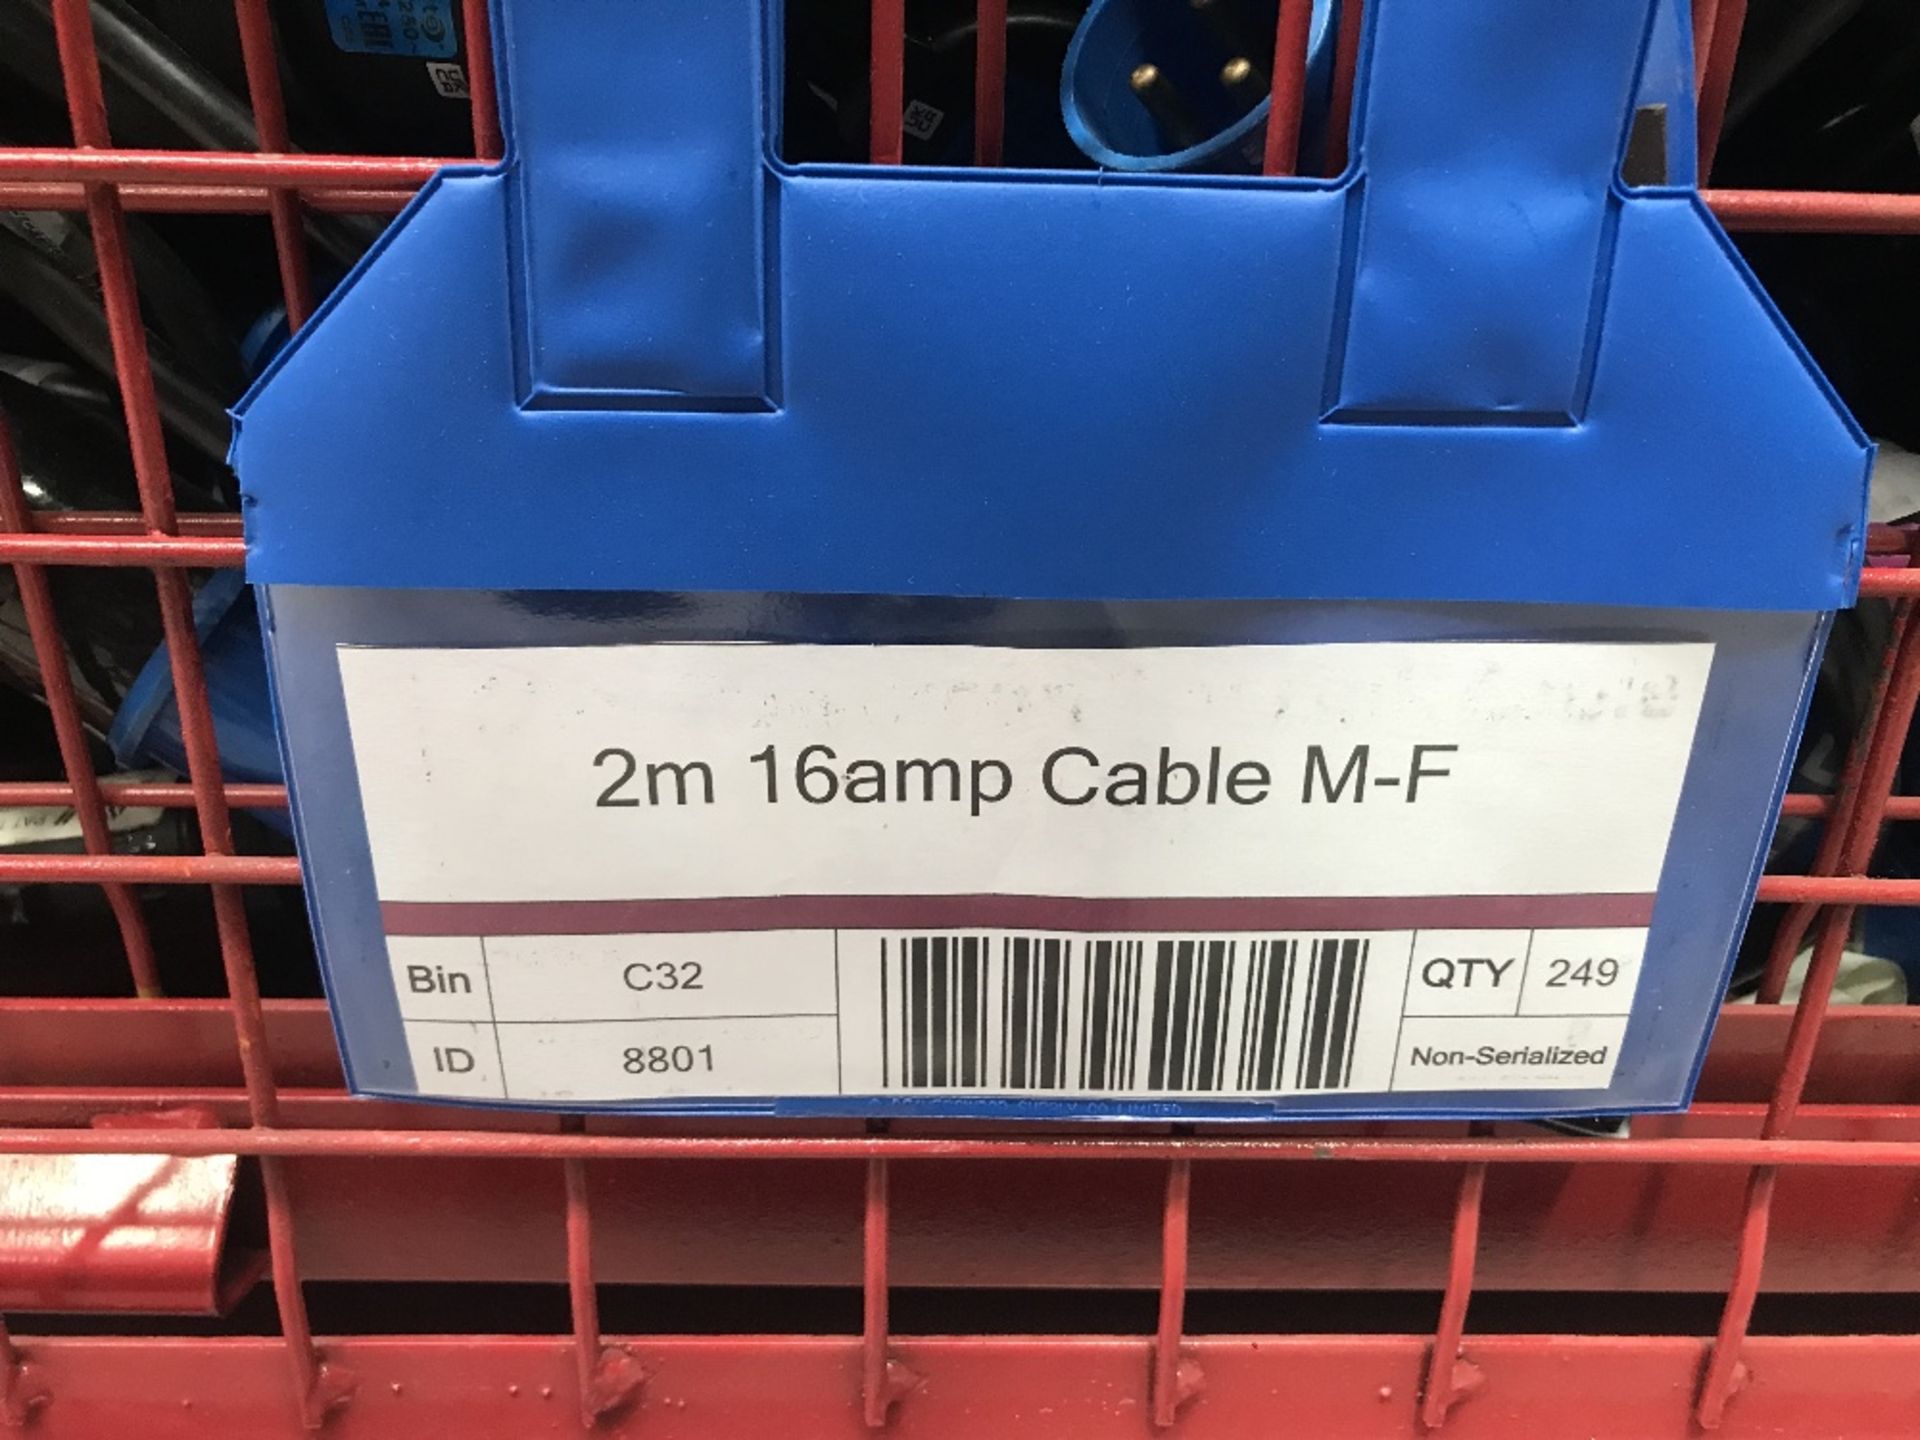 Large Quantity of 2m 16amp Cable M-F with Steel Fabricated Stillage - Image 2 of 2